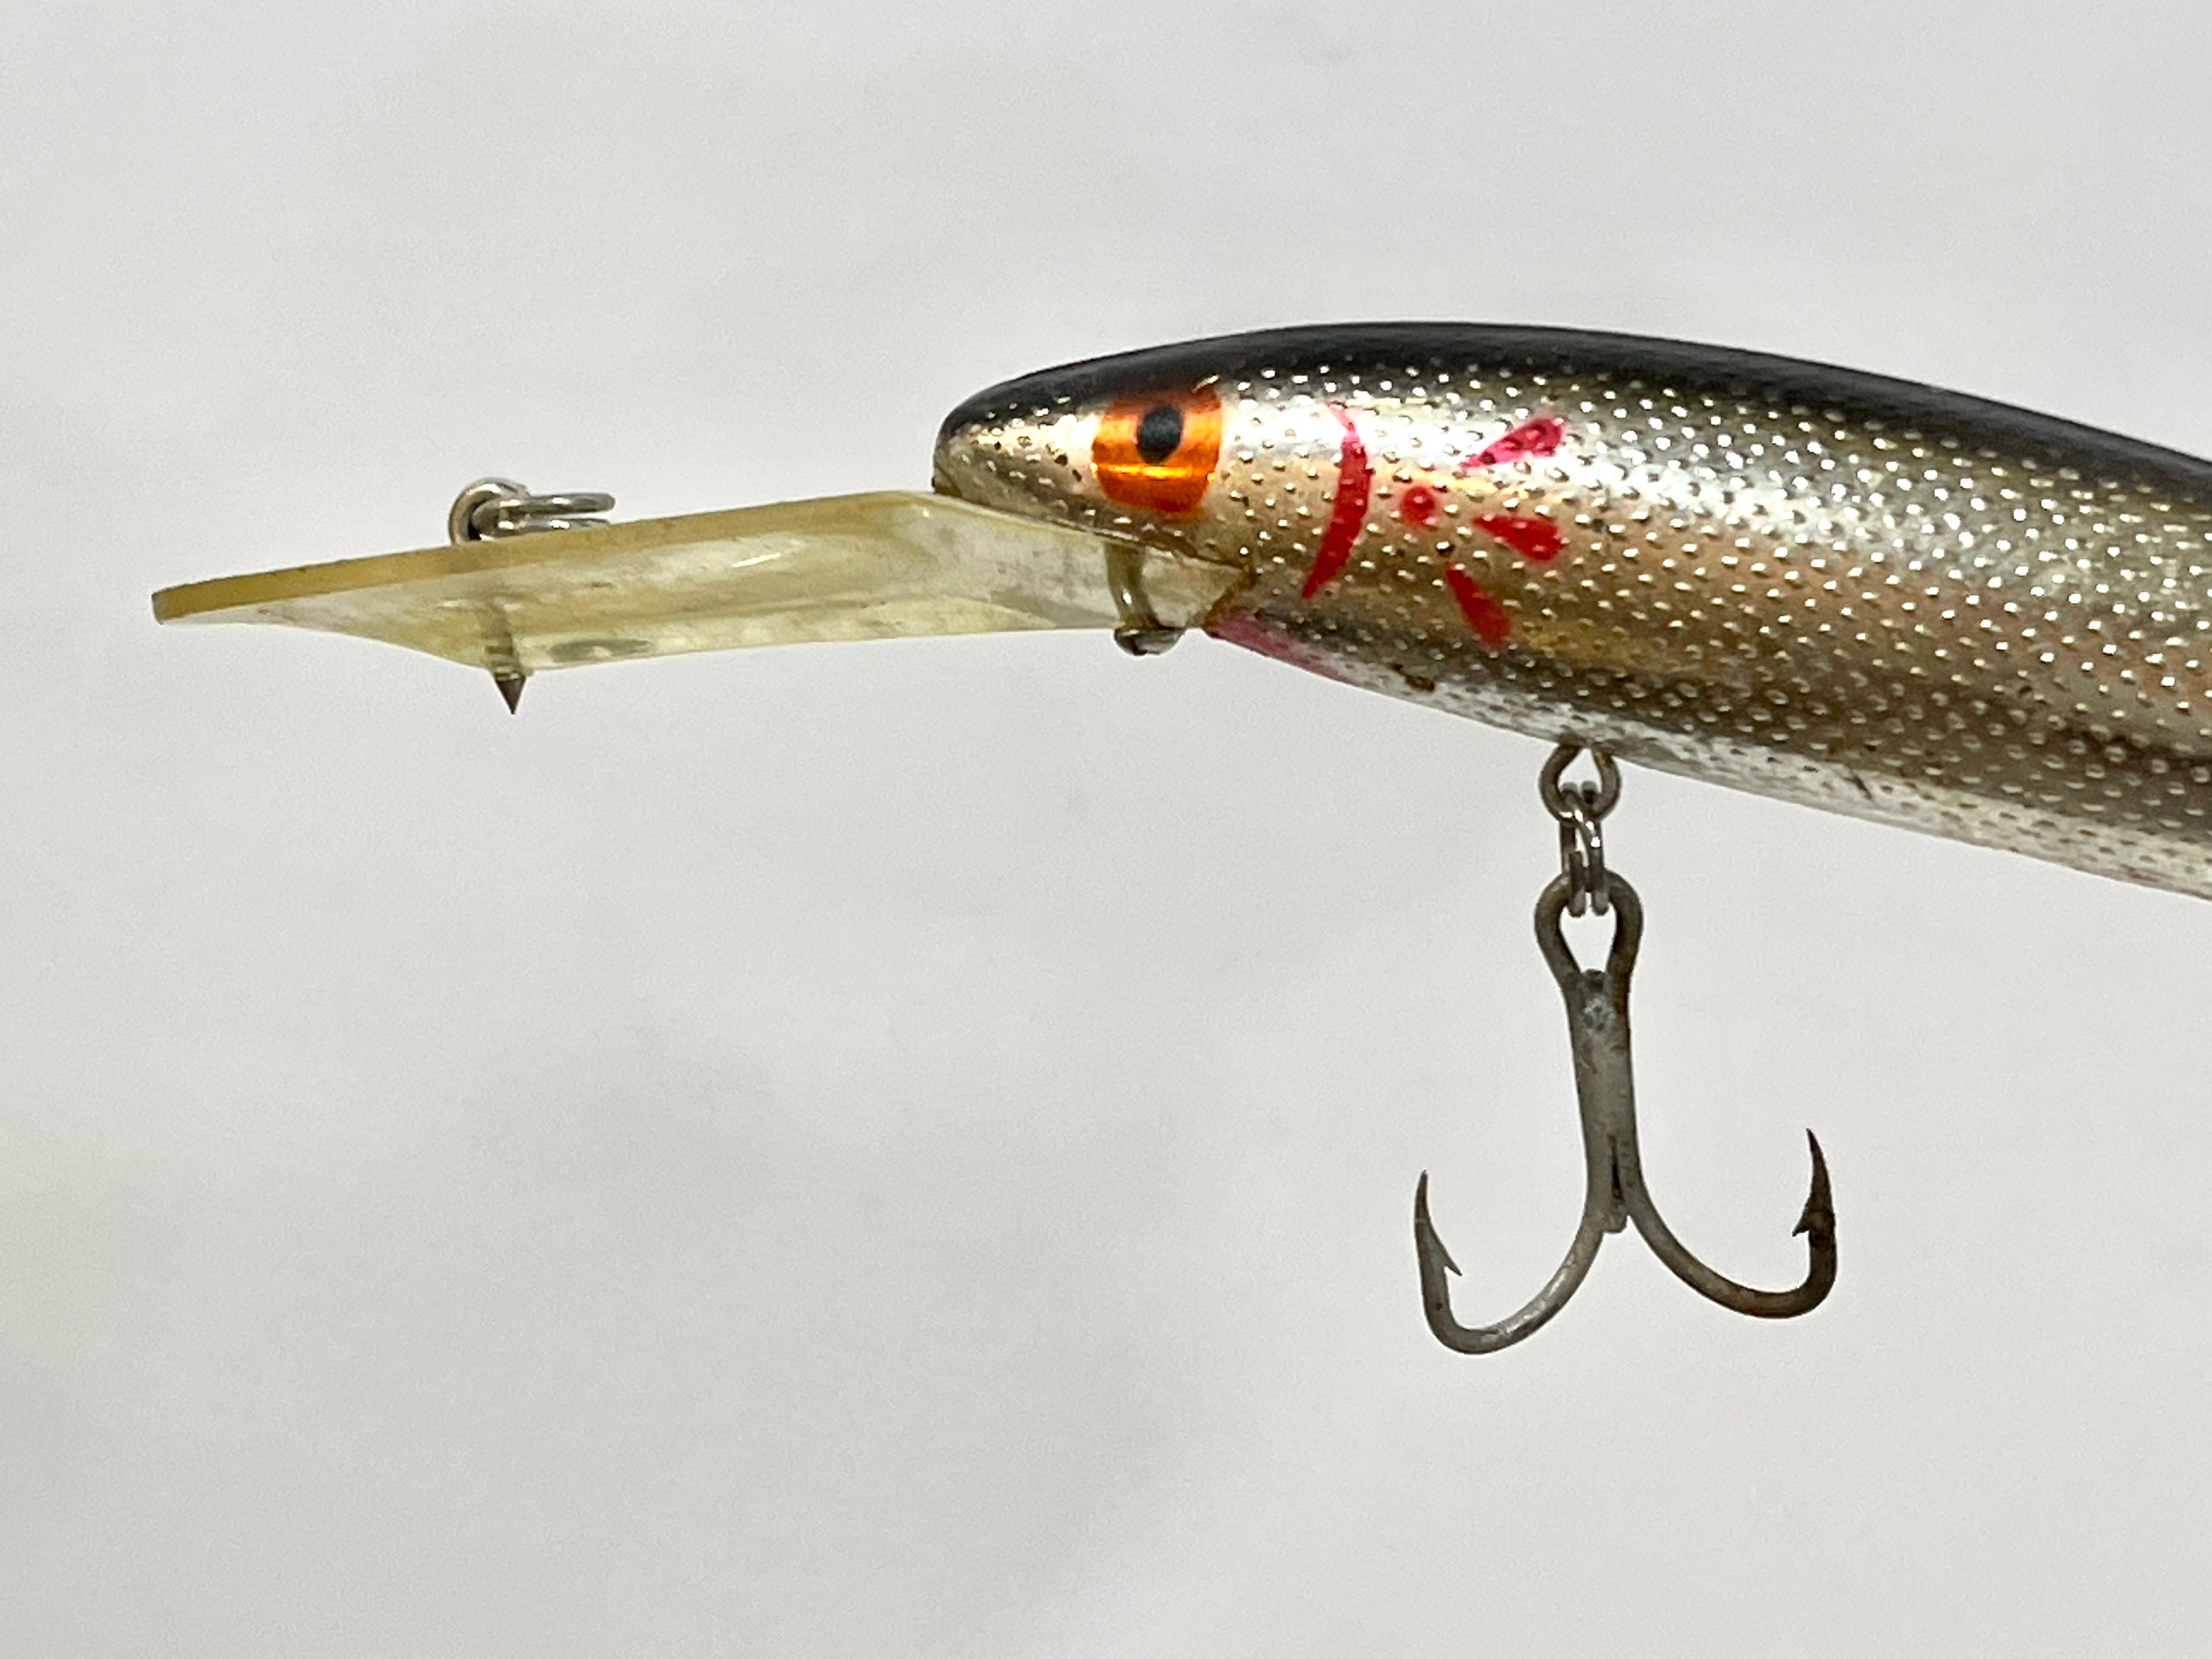 Vintage Lure, Cotton Cordell, Redfin, Deep Water, Straight FL. Swimmer, 5  Inches Long, Red Silver, Fishing Tackle, 1980s Era, Gift Idea 